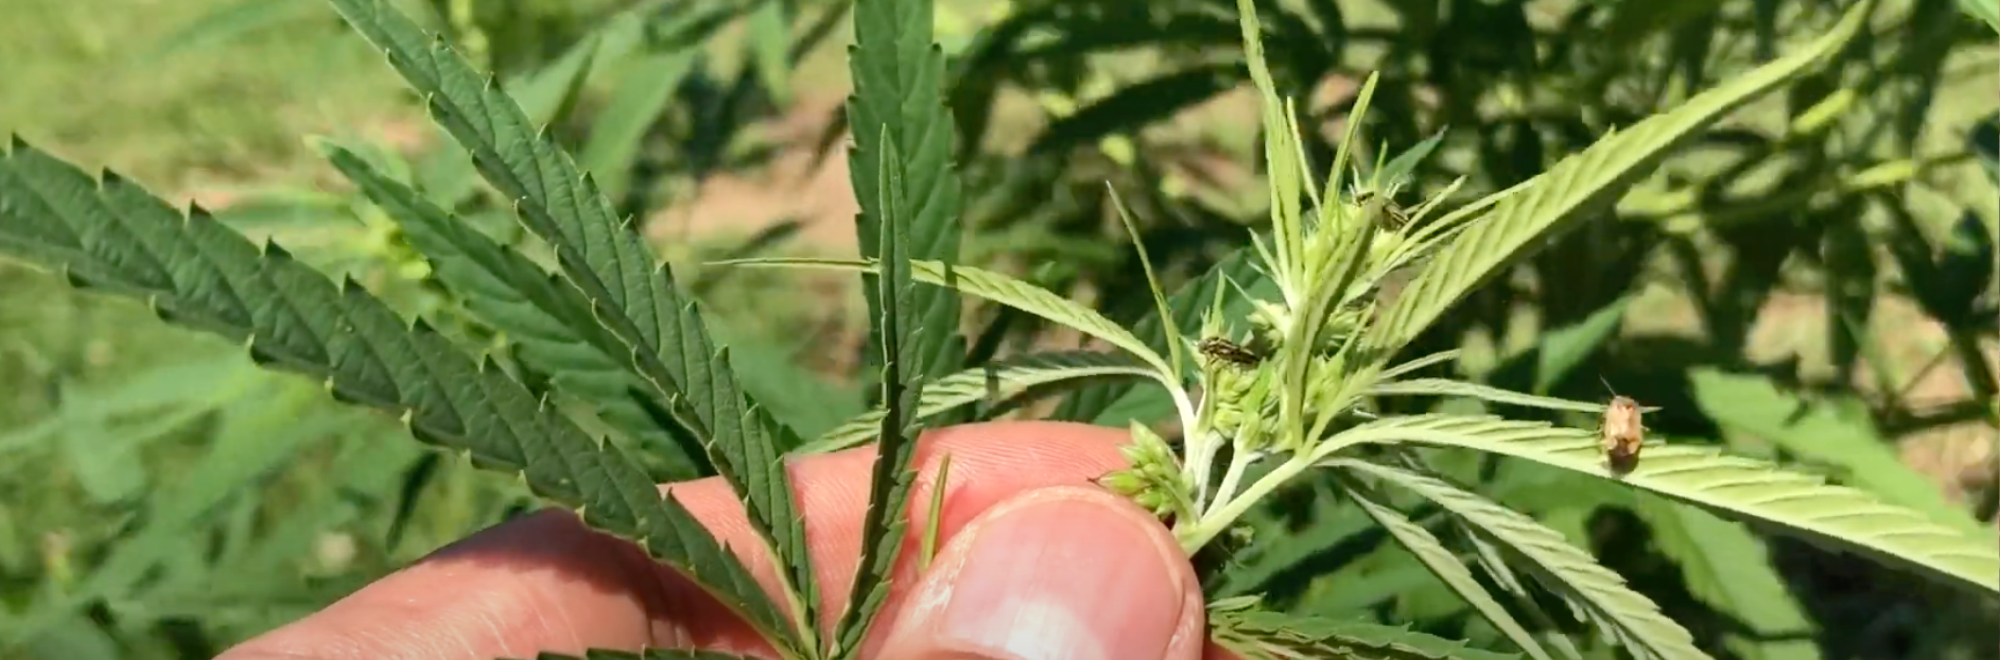 holding hemp with insects on plant